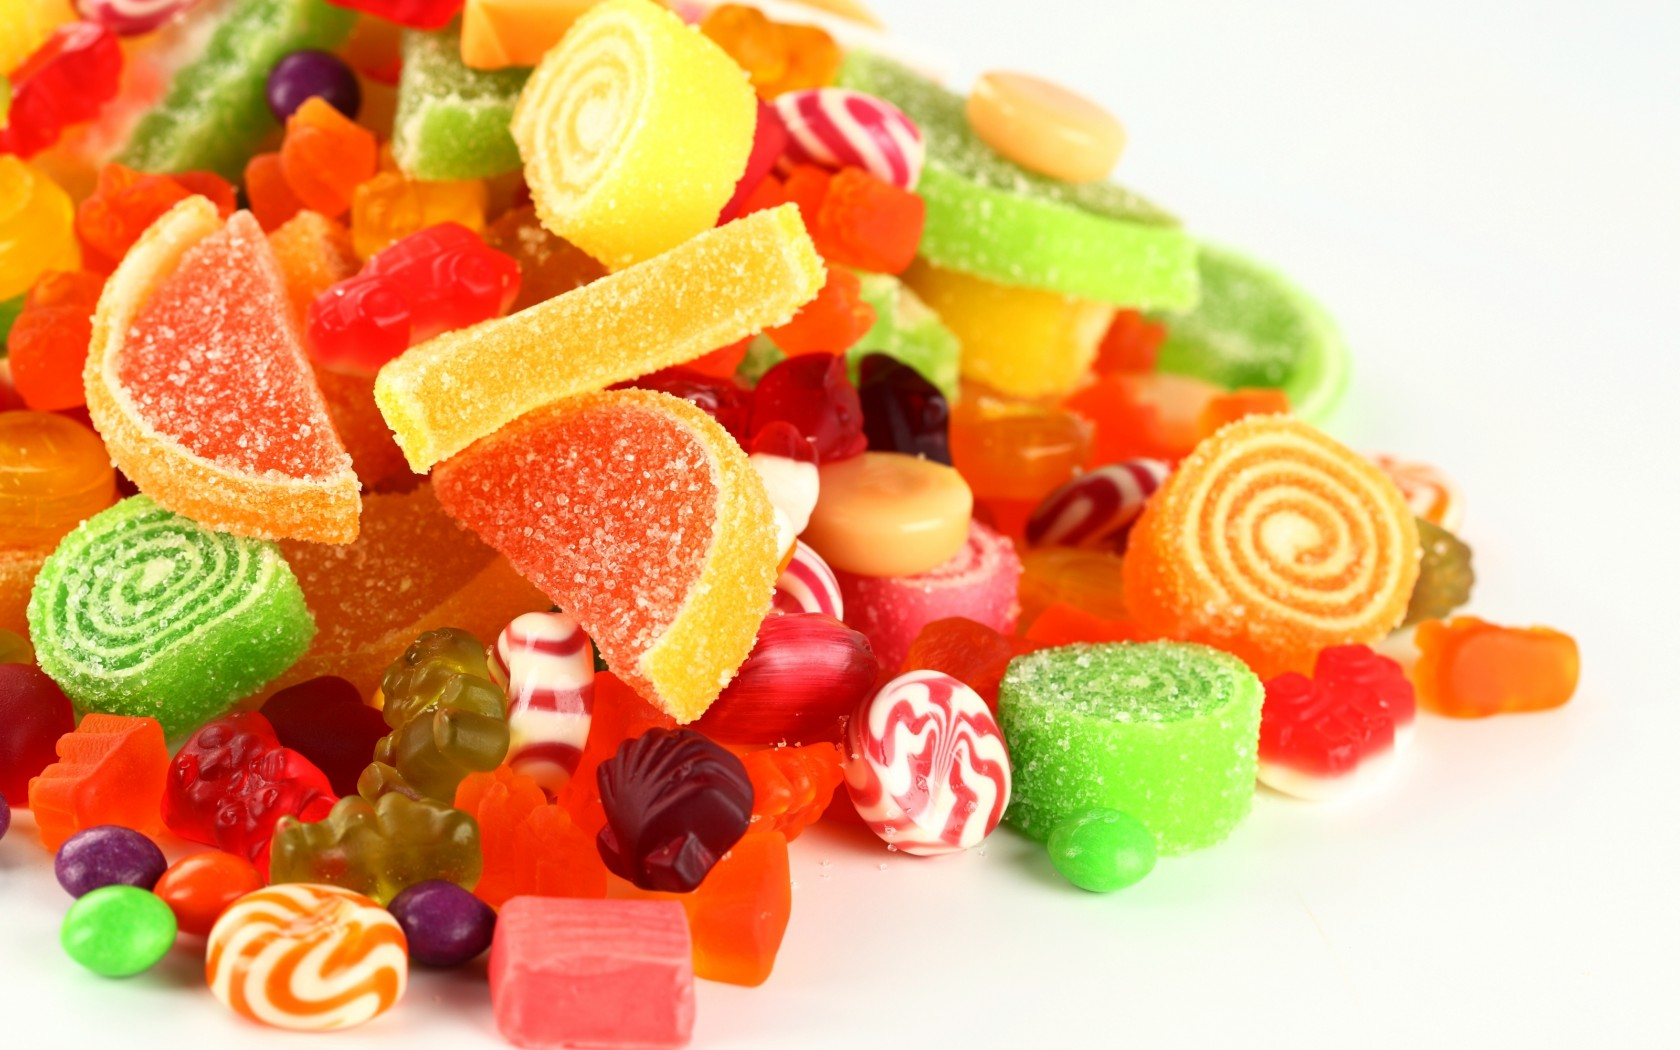 Candy images Sweeties HD wallpaper and background photos 33338276